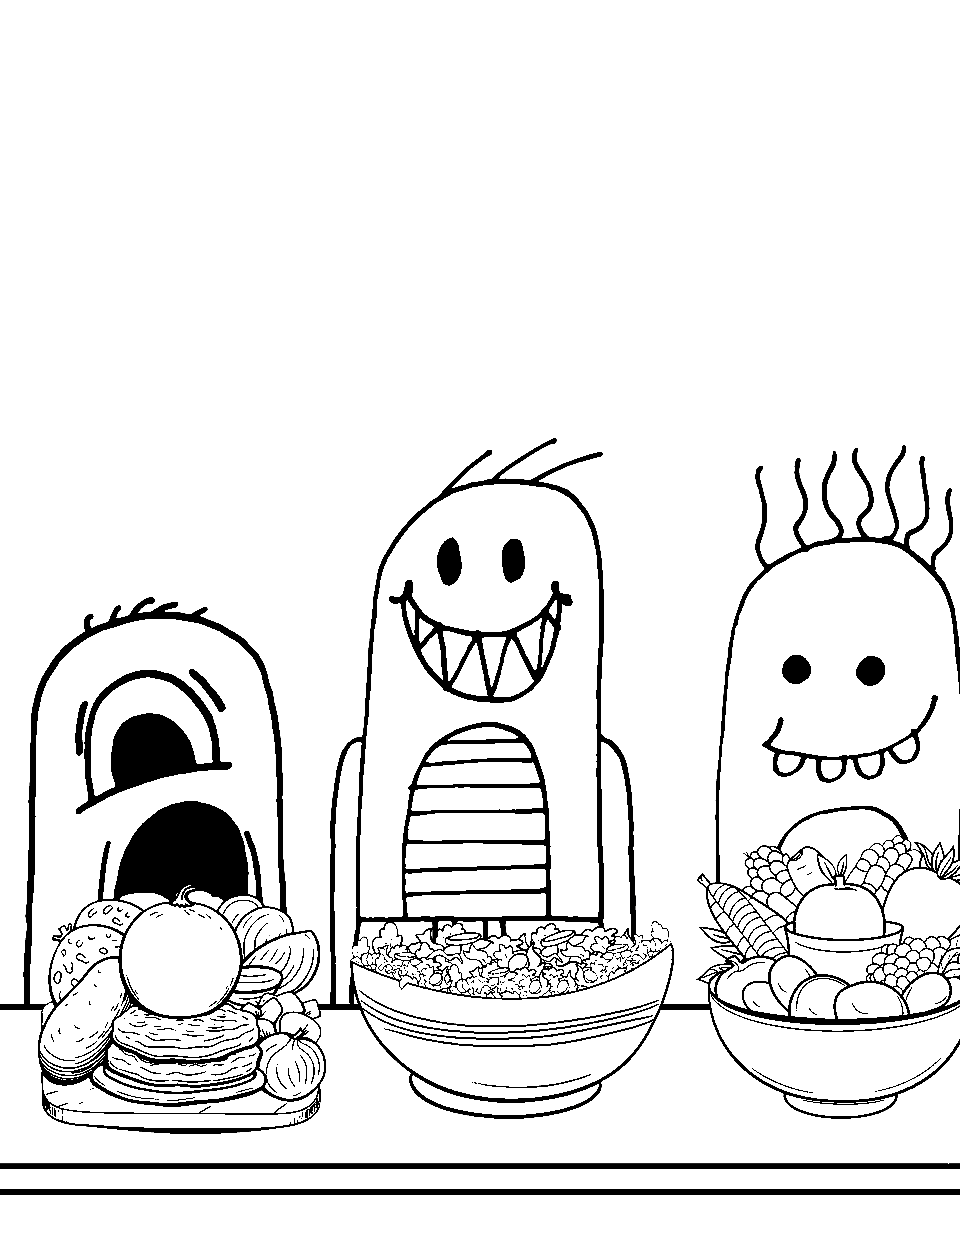 Monster Family Cooking Together Coloring Page - A monster family preparing a meal together in their kitchen.